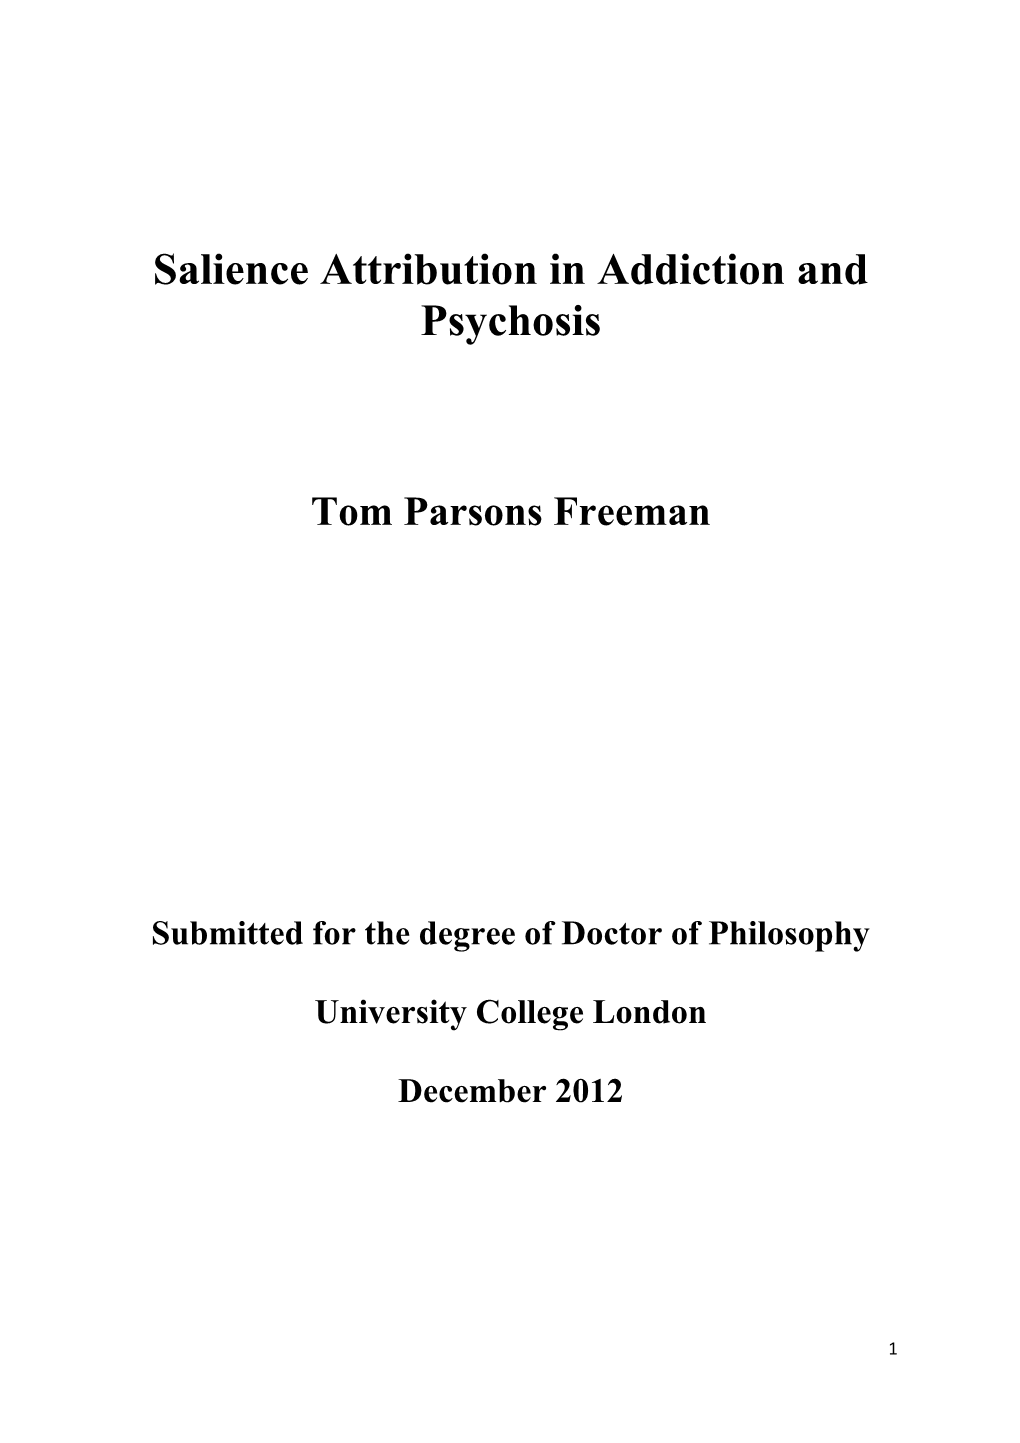 Salience Attribution in Addiction and Psychosis